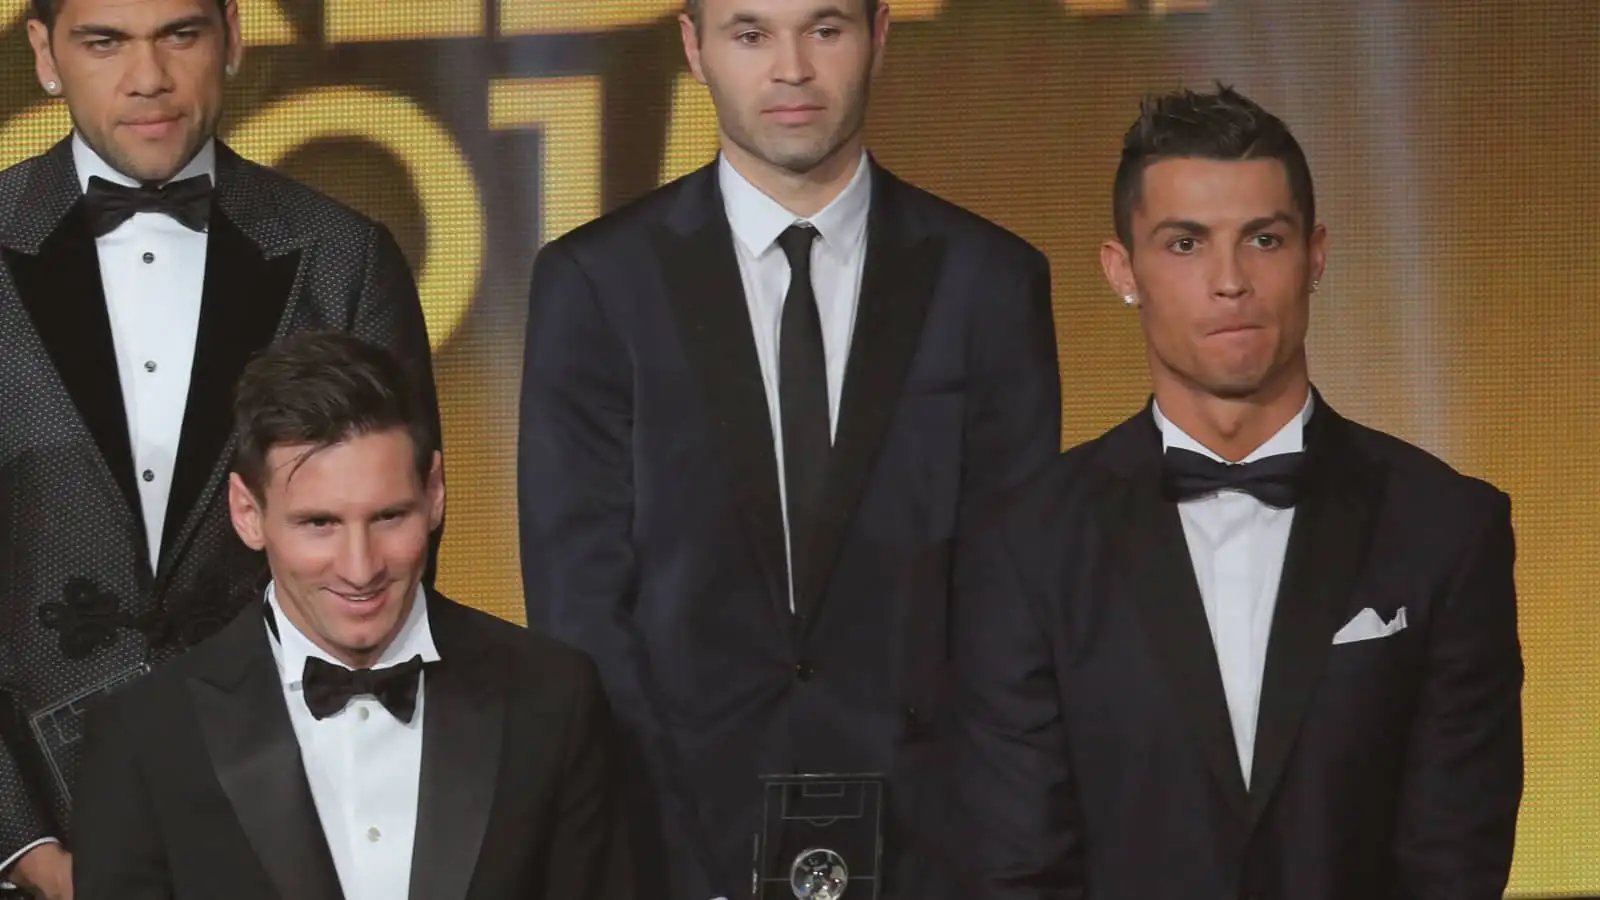 Messi did not ‘care’ about Ronaldo because ‘he was the best’ so rivalry was ‘not his priority’